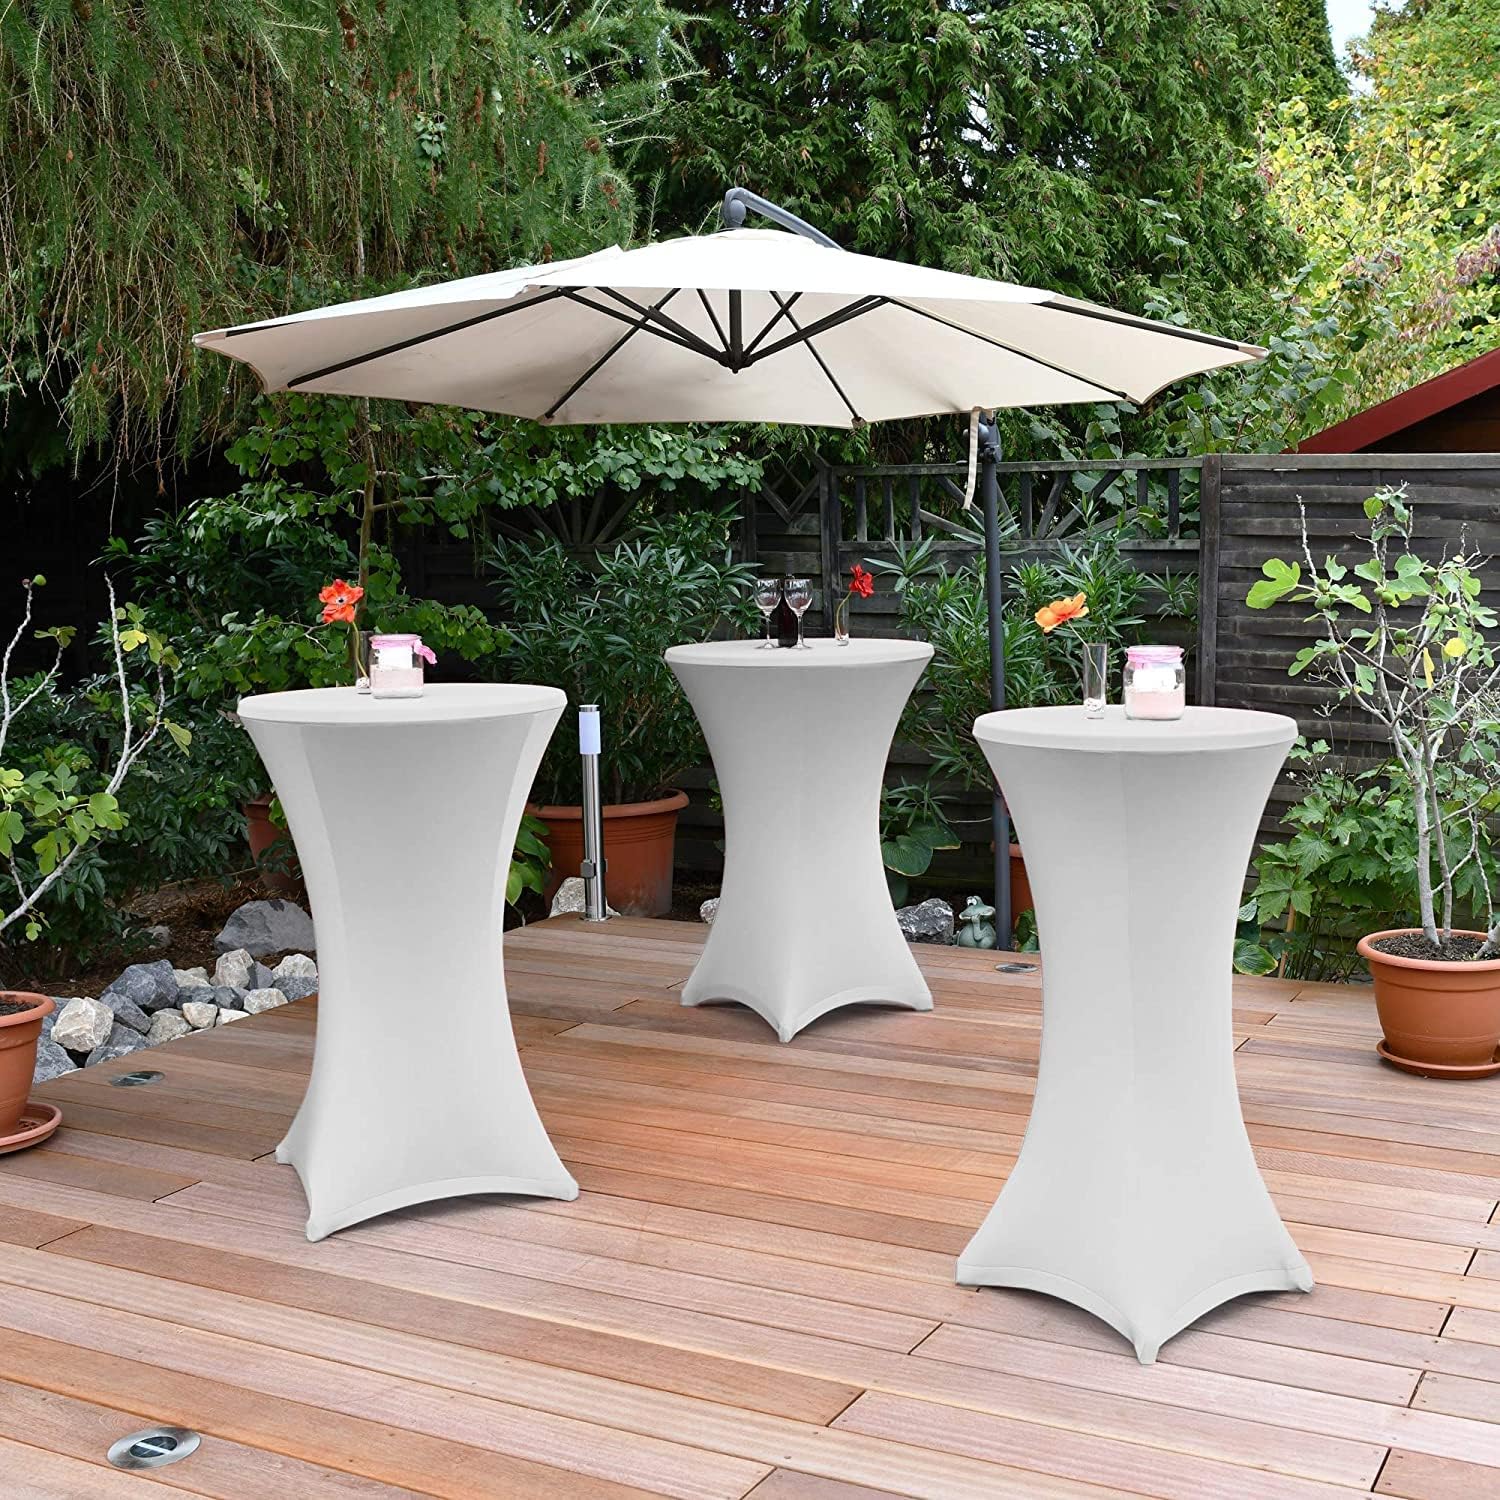 Cocktail Spandex Table CoversUp to 30% off